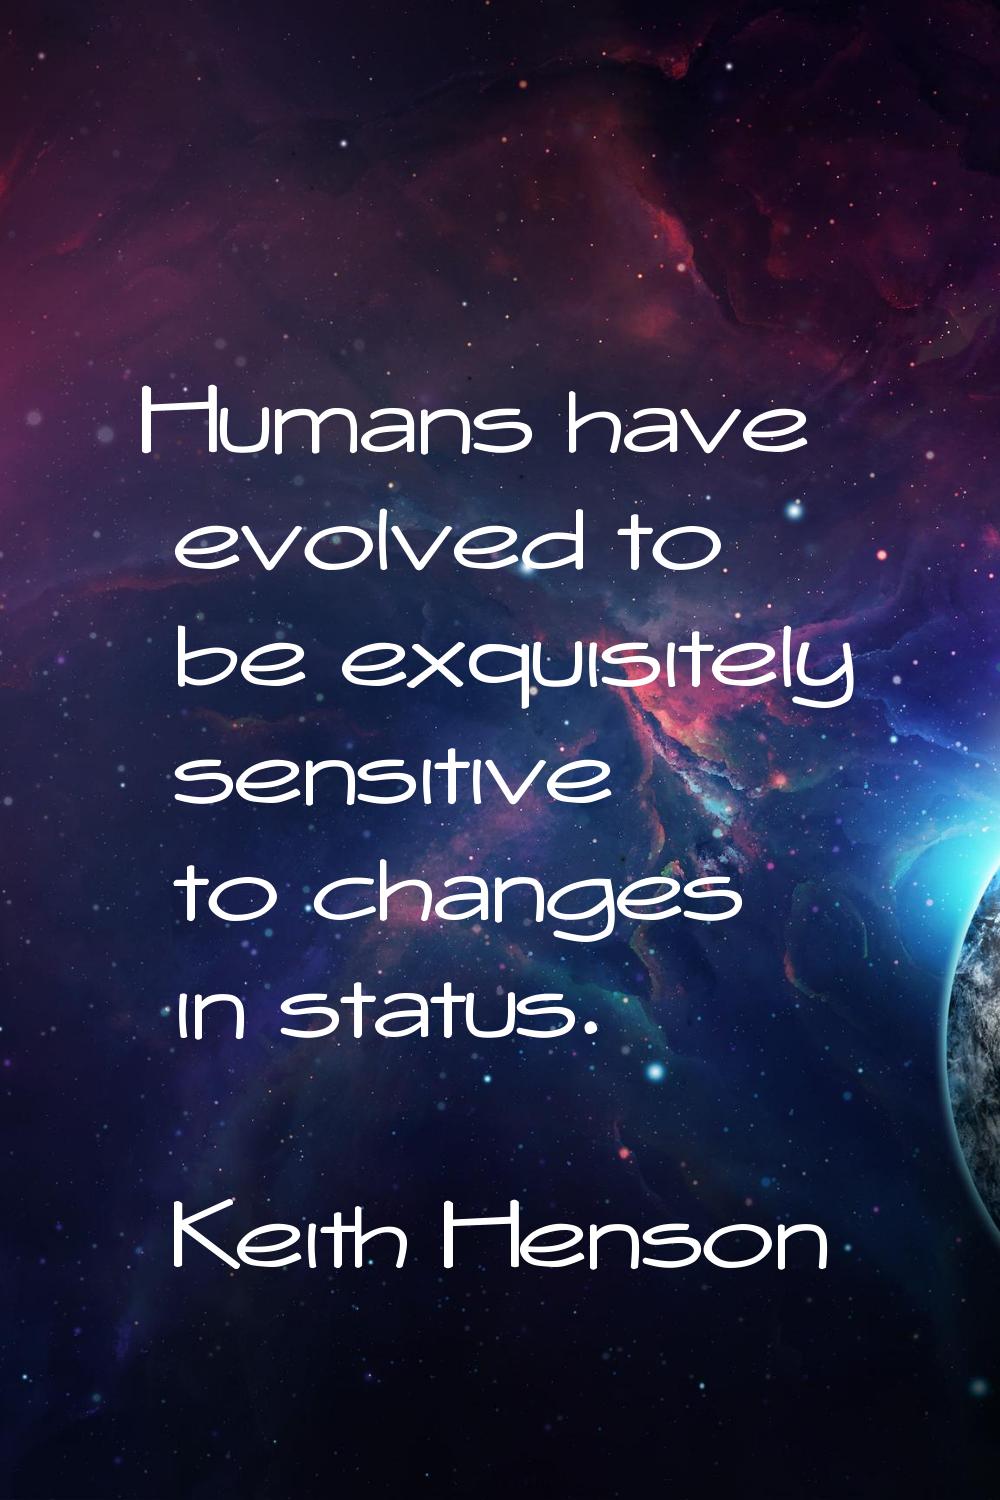 Humans have evolved to be exquisitely sensitive to changes in status.